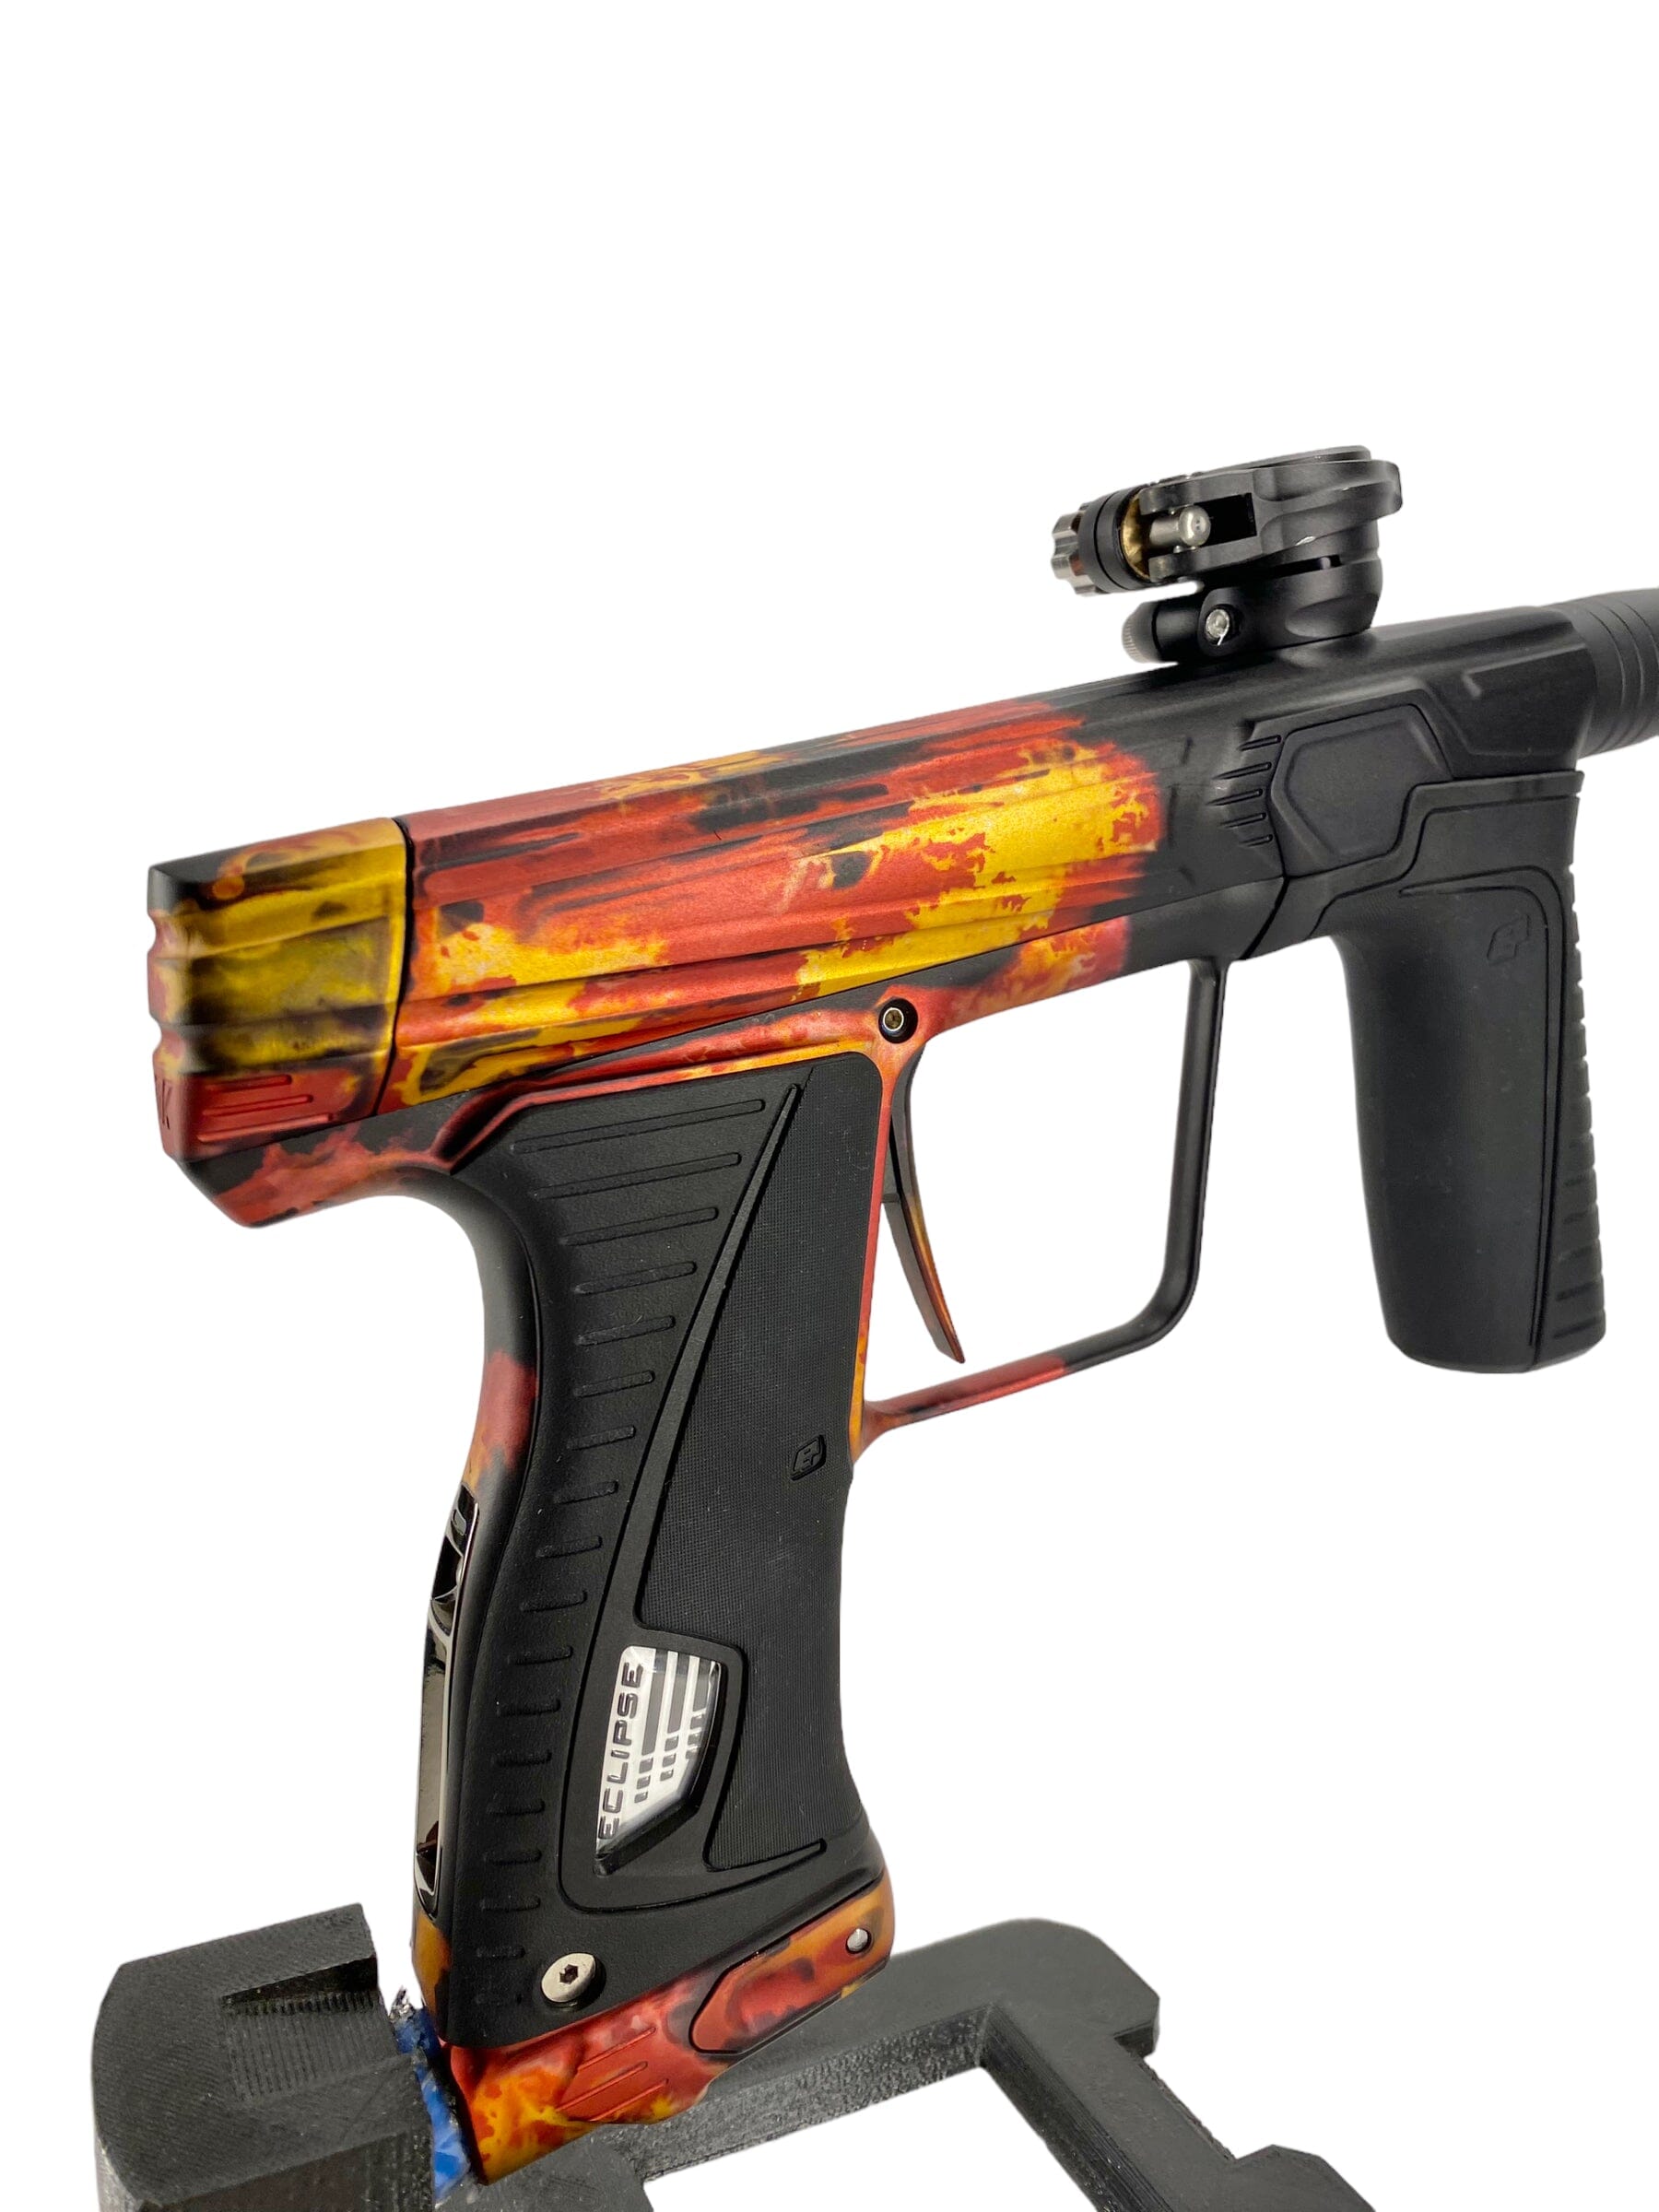 Used Planet Eclipse Gtek 180r Paintball Gun from CPXBrosPaintball Buy/Sell/Trade Paintball Markers, Paintball Hoppers, Paintball Masks, and Hormesis Headbands